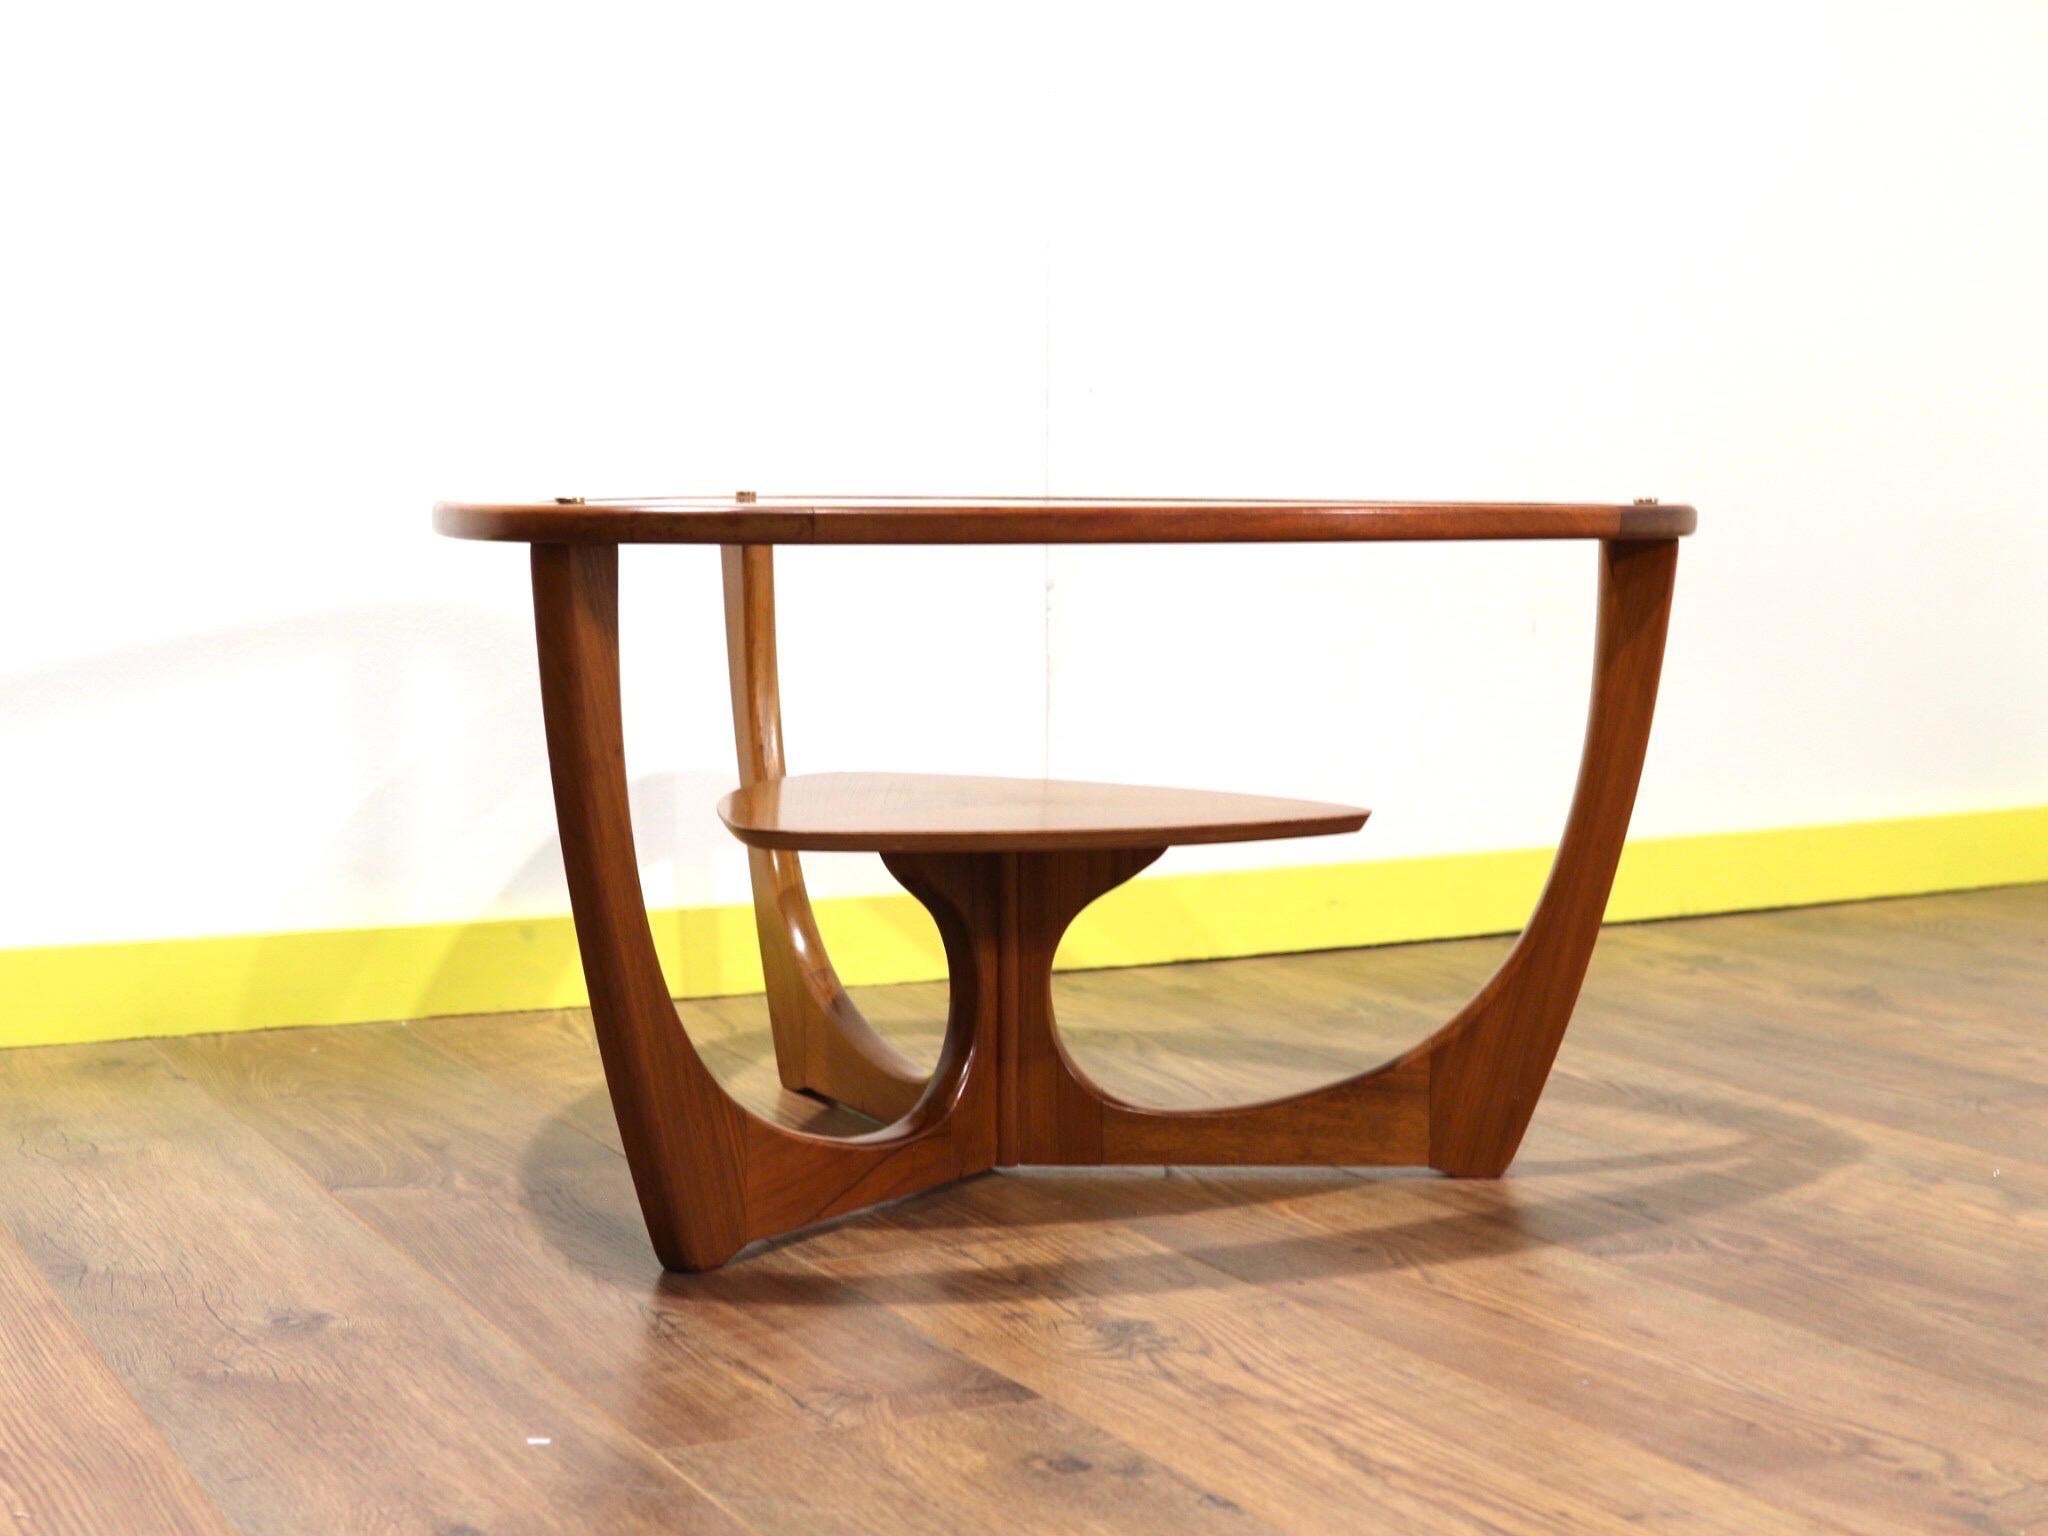 A beautiful example of mid century style that that would look great in any living space. This rare teak coffee table with gorgeous lines shout mid-century style.